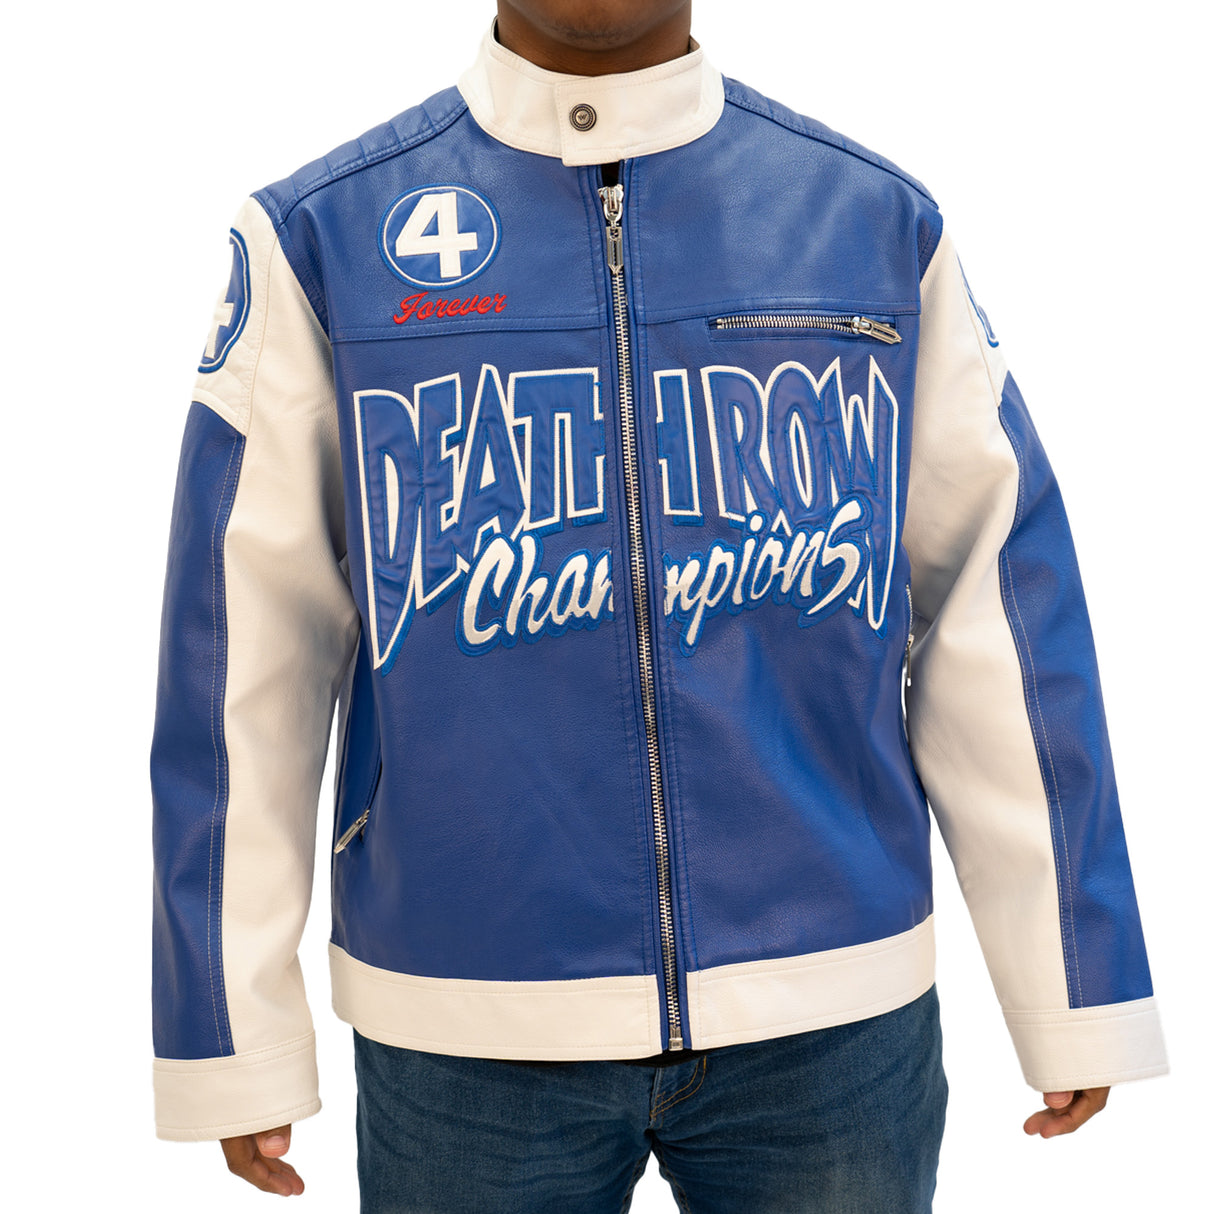 DEATHROW CHAMPS RACING JACKET (BLUE)